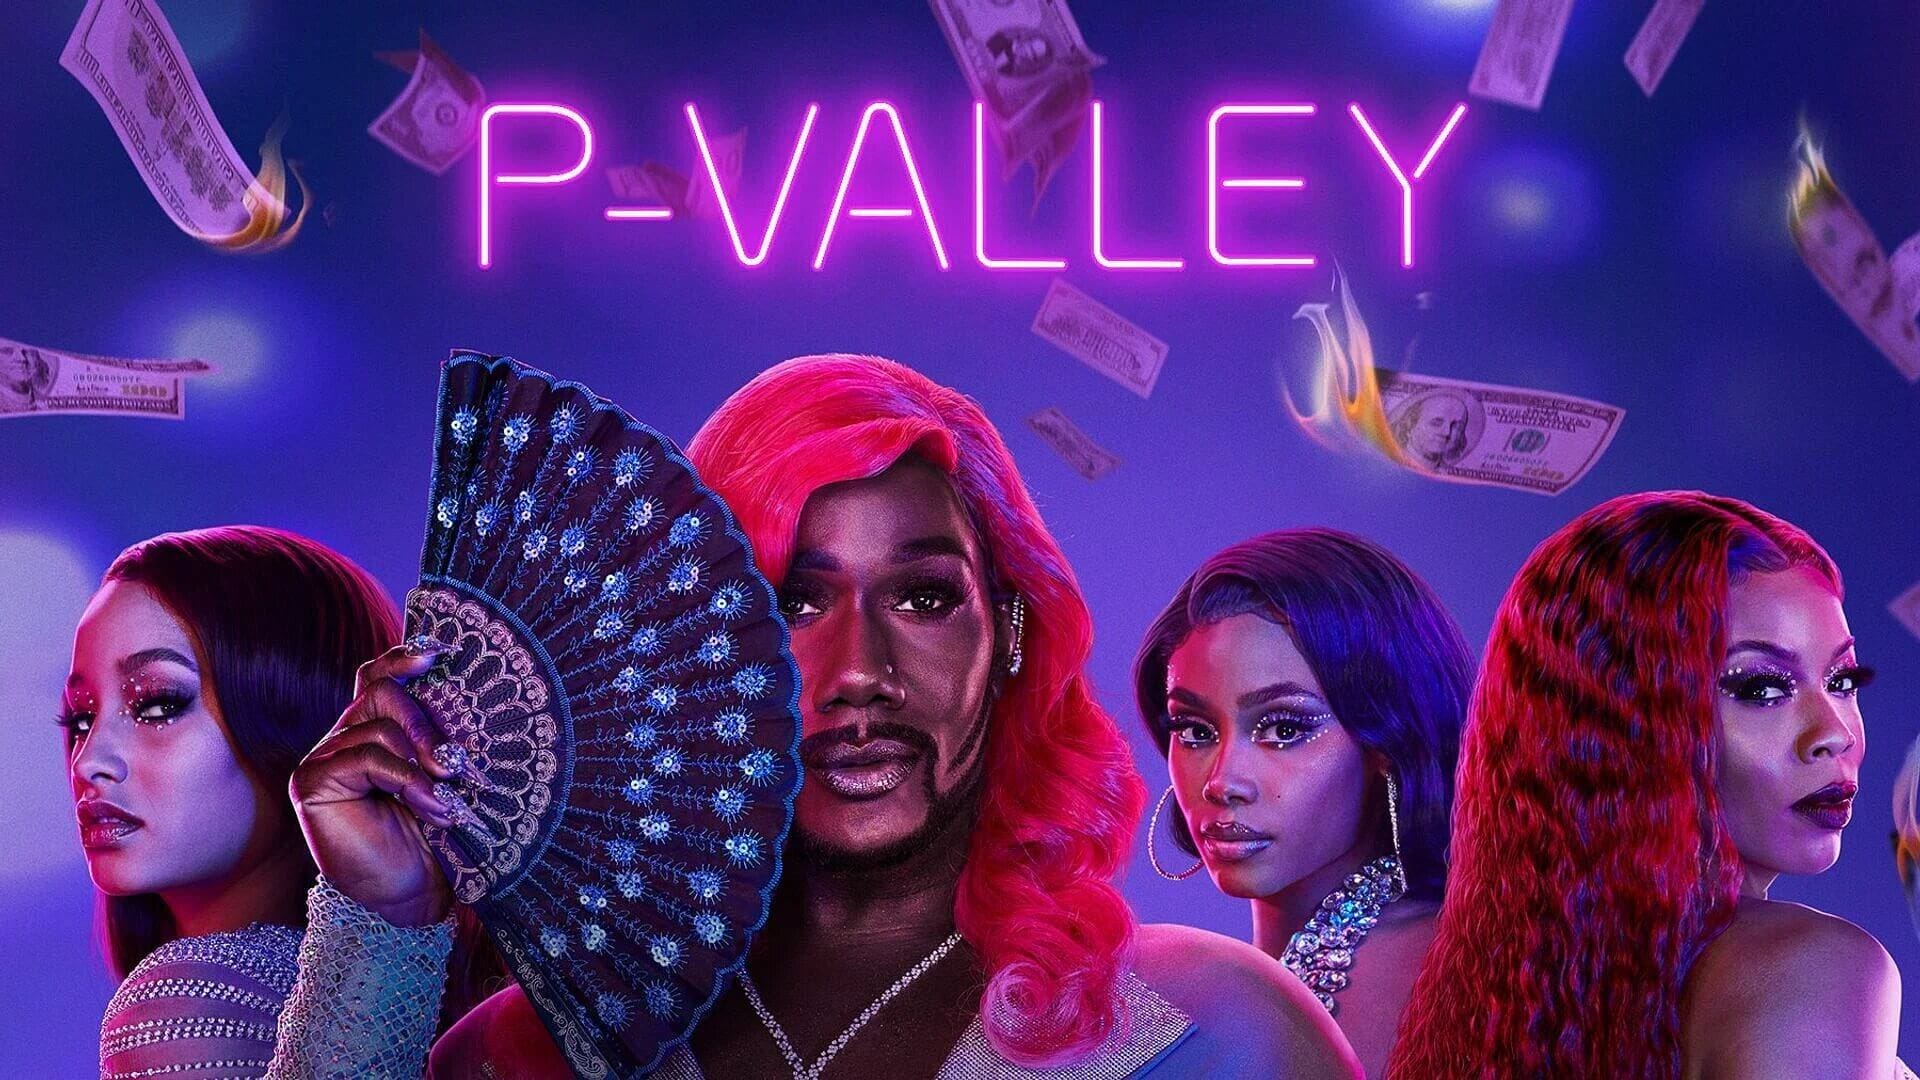 P-Valley-Season-2-Episode-6-Spoilers-for-July-10-2022-Revealed